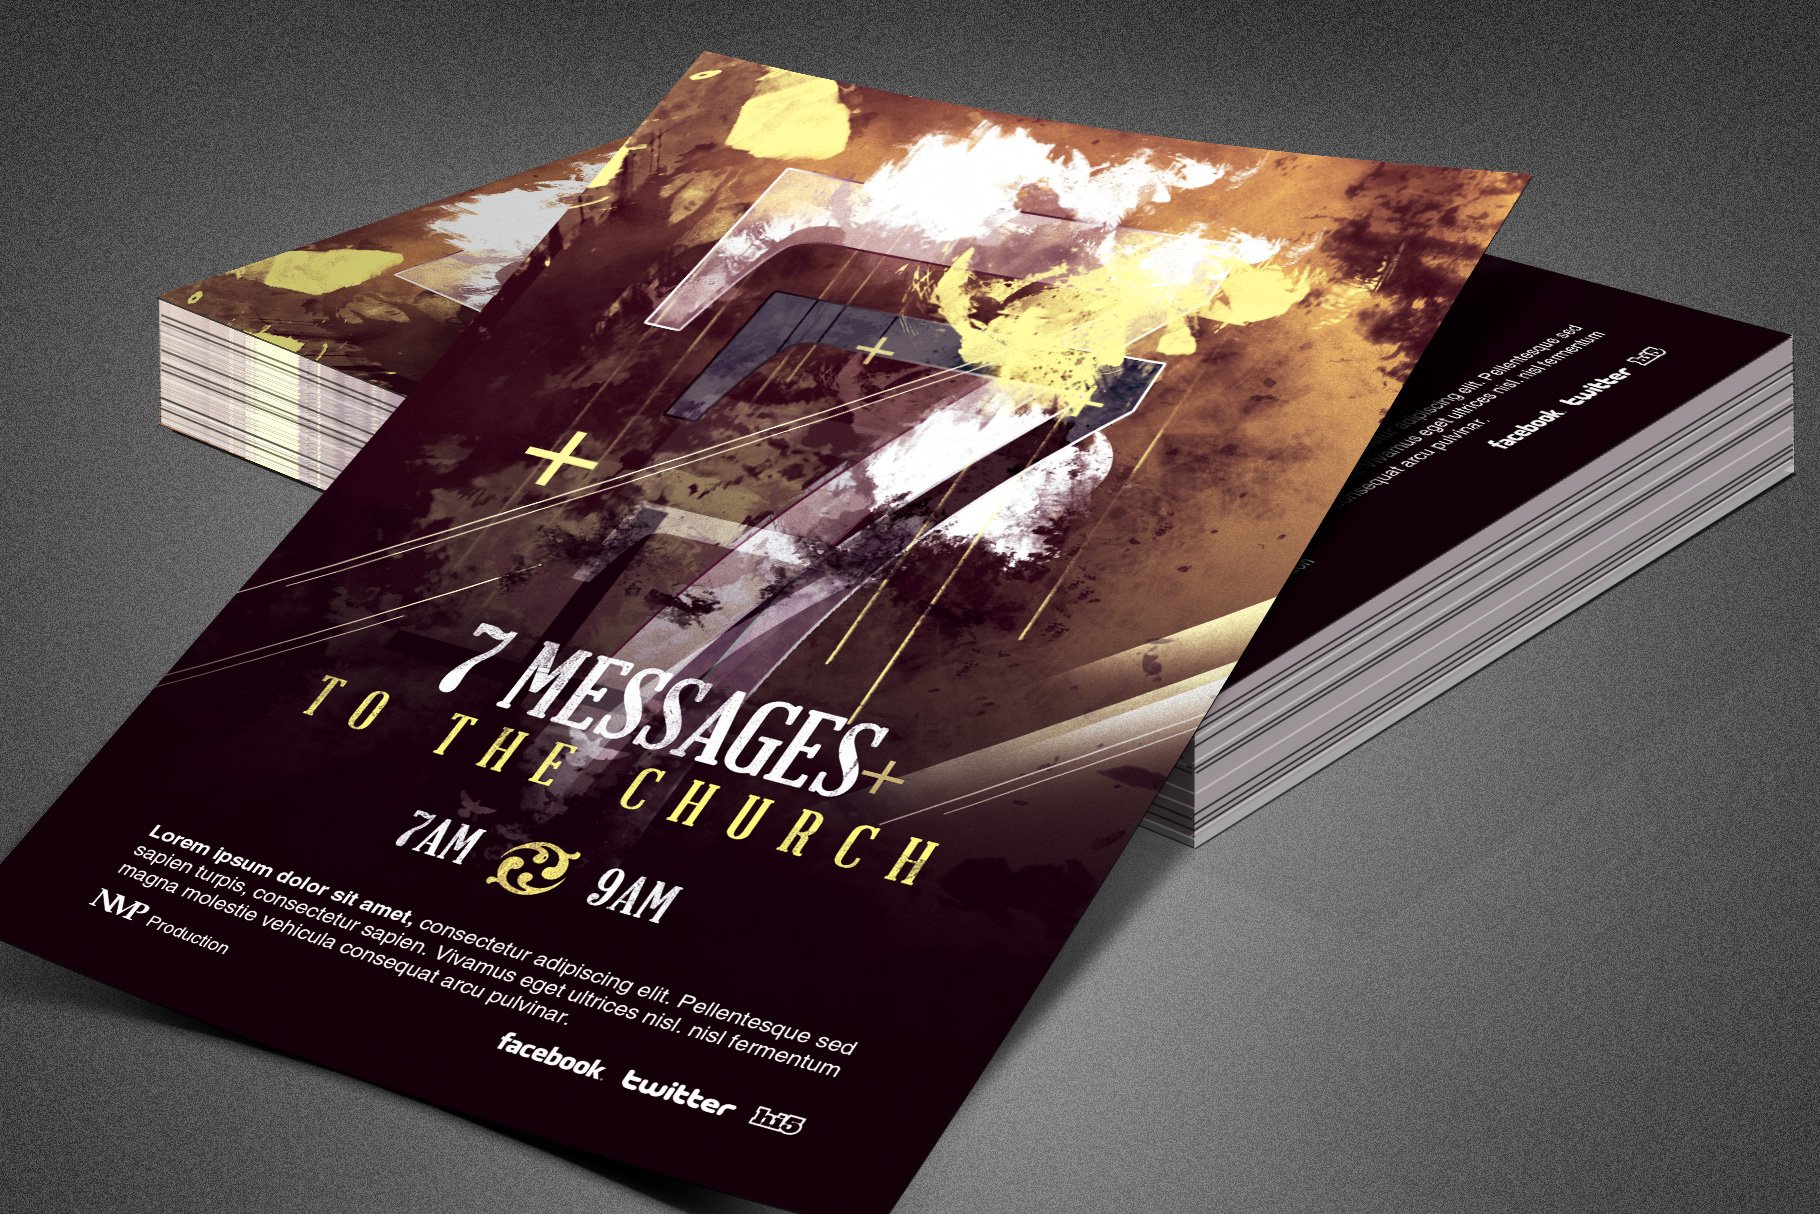 Seven Messages Church Flyer Template by Mark Taylor on Dribbble